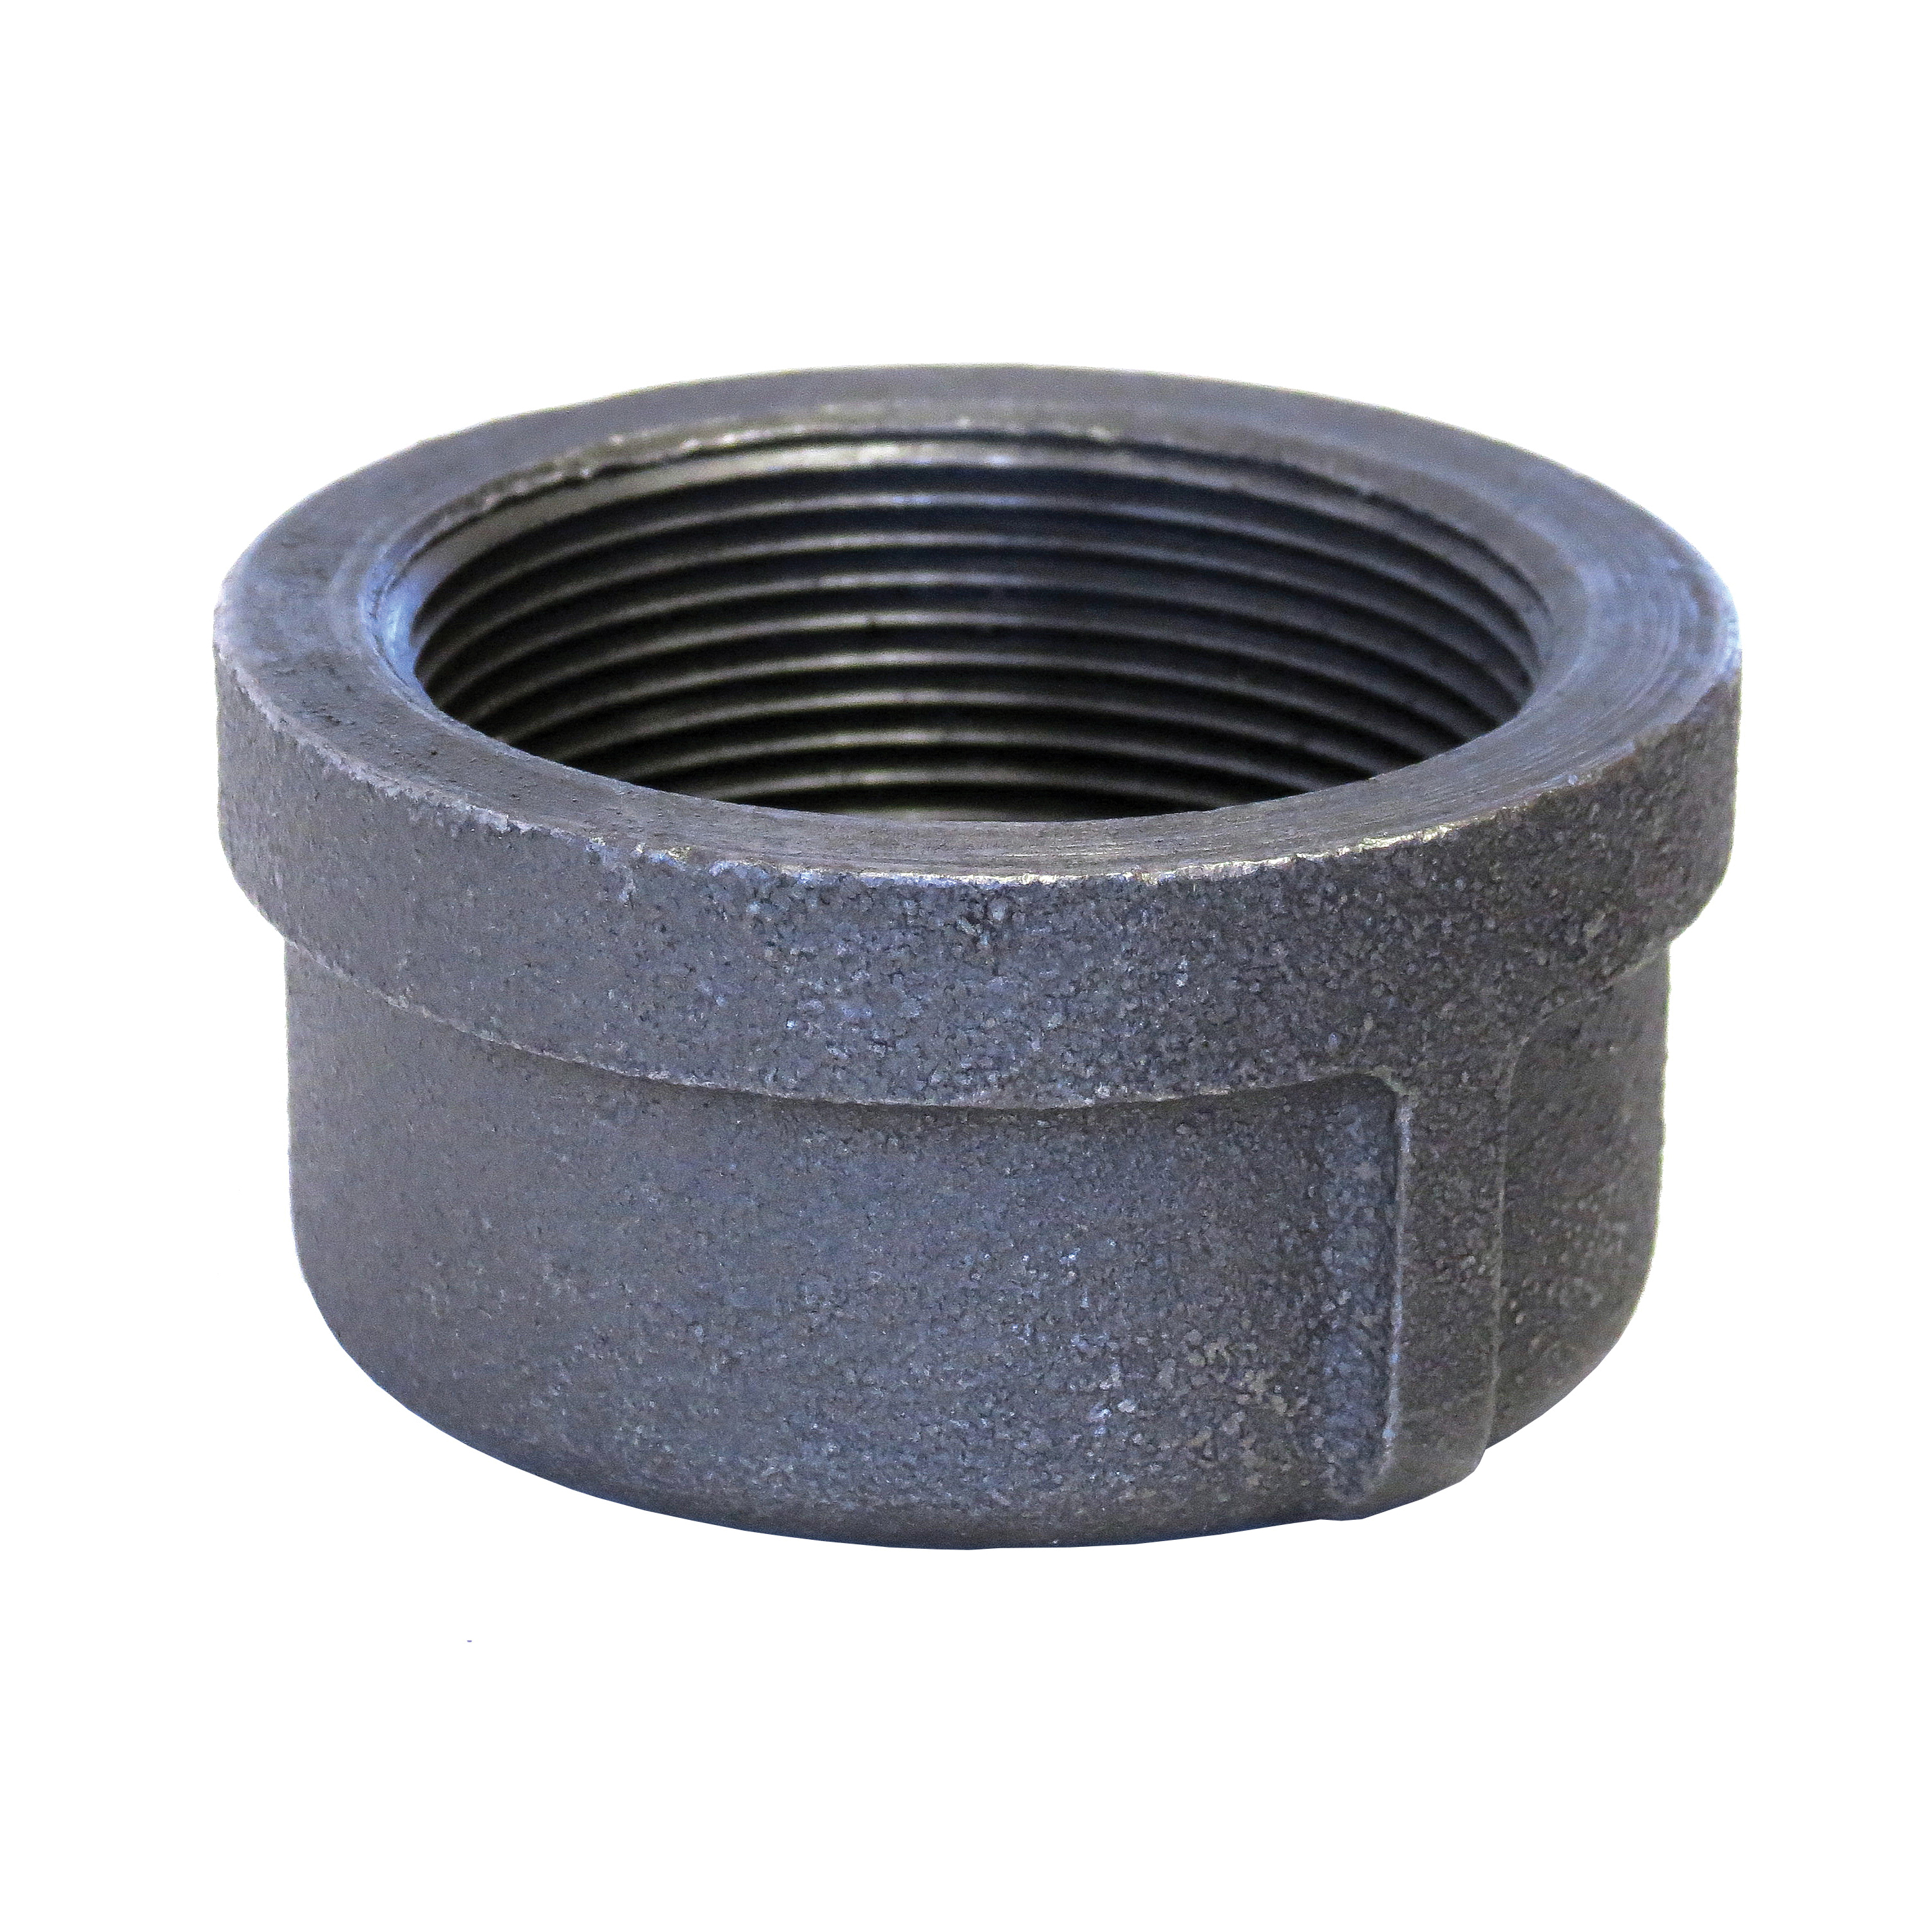 Anvil® 0318900560 FIG 1124 Standard Pipe Cap, 3/4 in Nominal, FNPT End Style, 150 lb, Malleable Iron, Black Oxide, Domestic